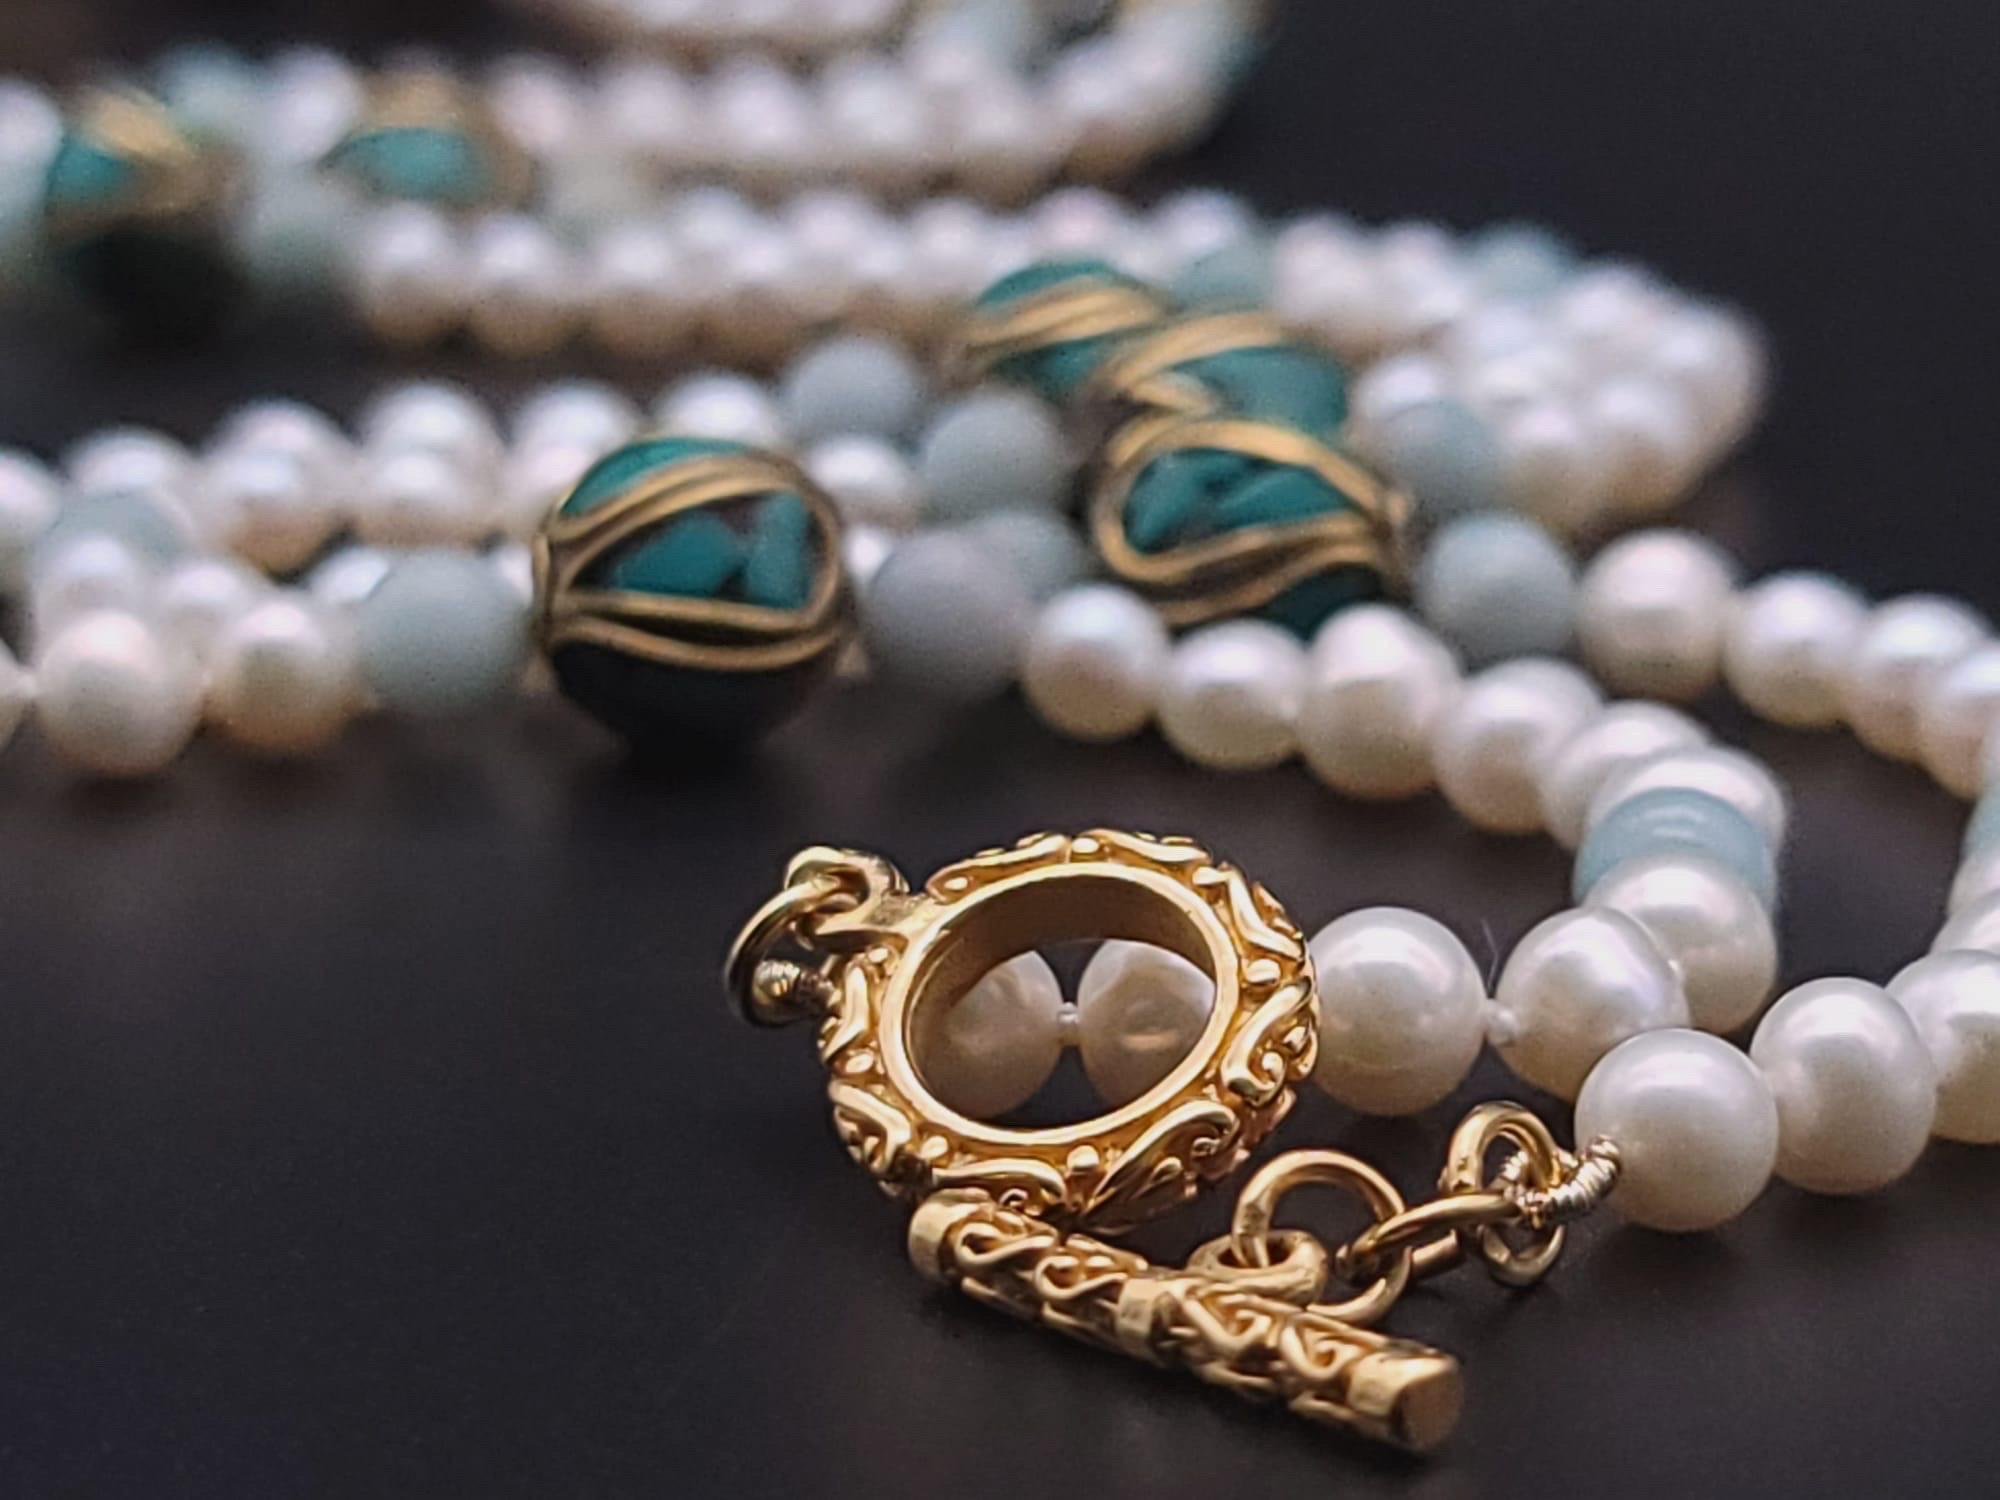 A.Jeschel Stunning Long Pearls and Amazonite necklace For Sale 4